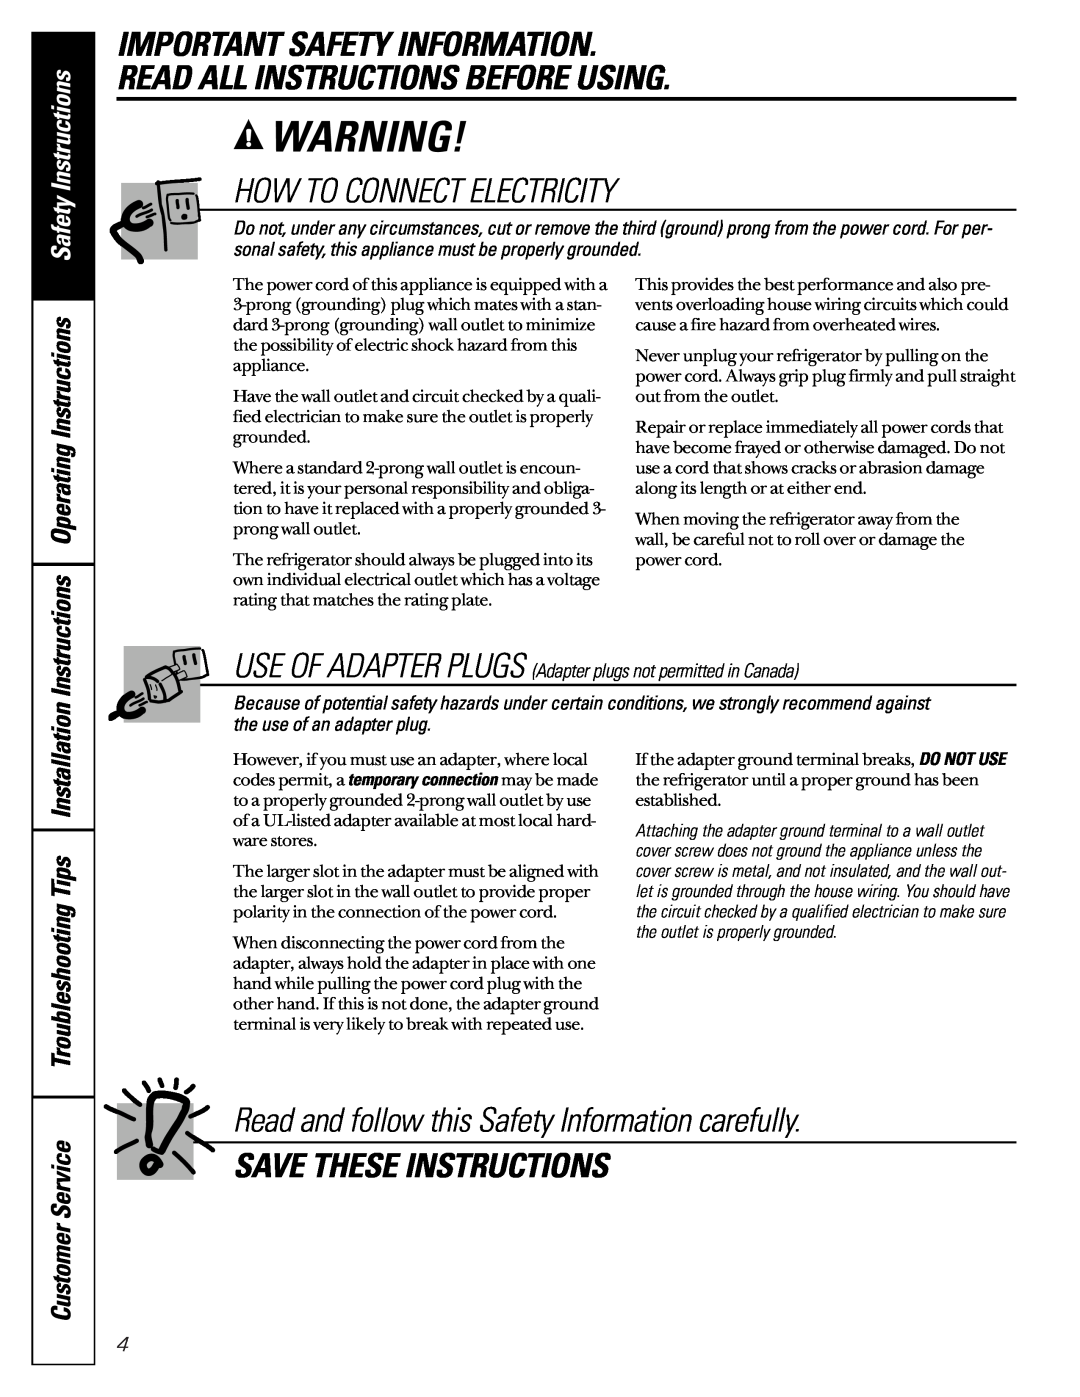 GE 22-27 How To Connect Electricity, Save These Instructions, Read and follow this Safety Information carefully 